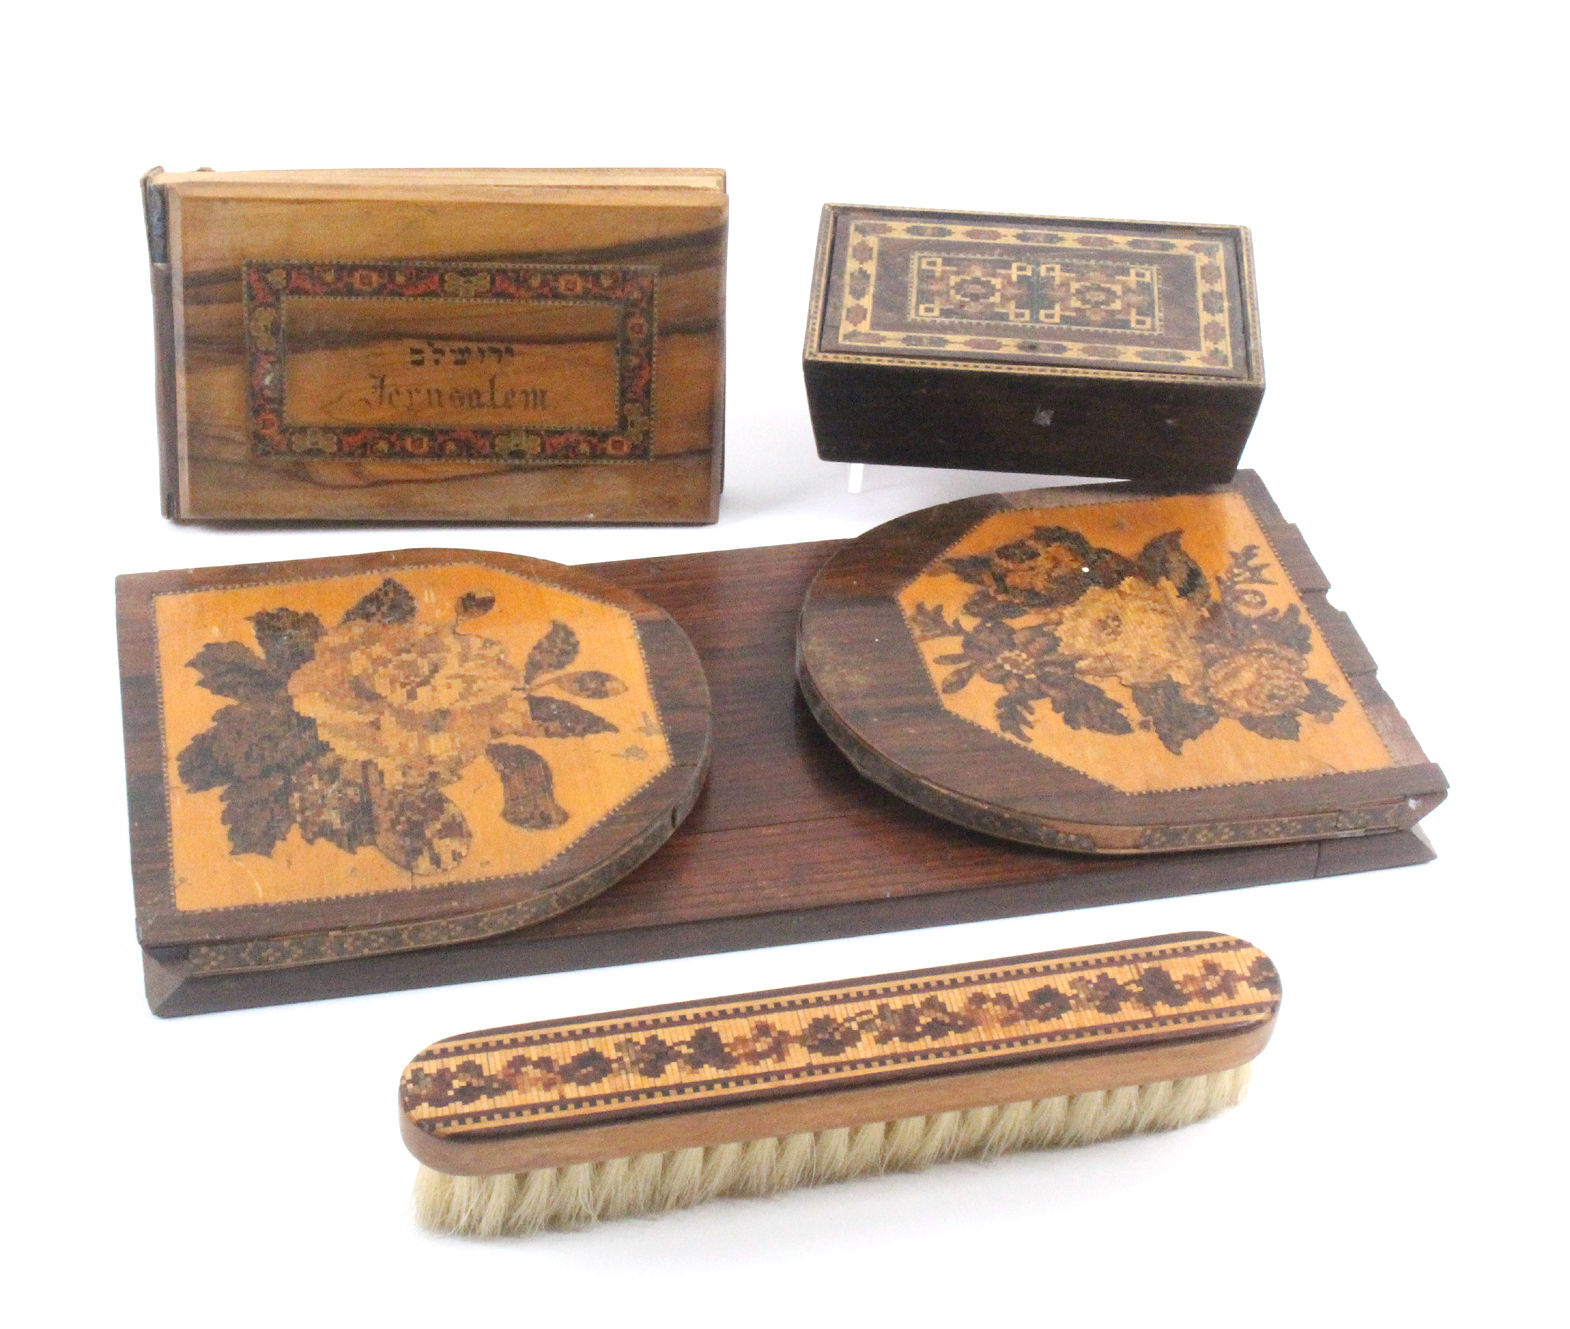 Tunbridge ware – three pieces and a Sorrento ware album – comprising a pin hinge sloping side